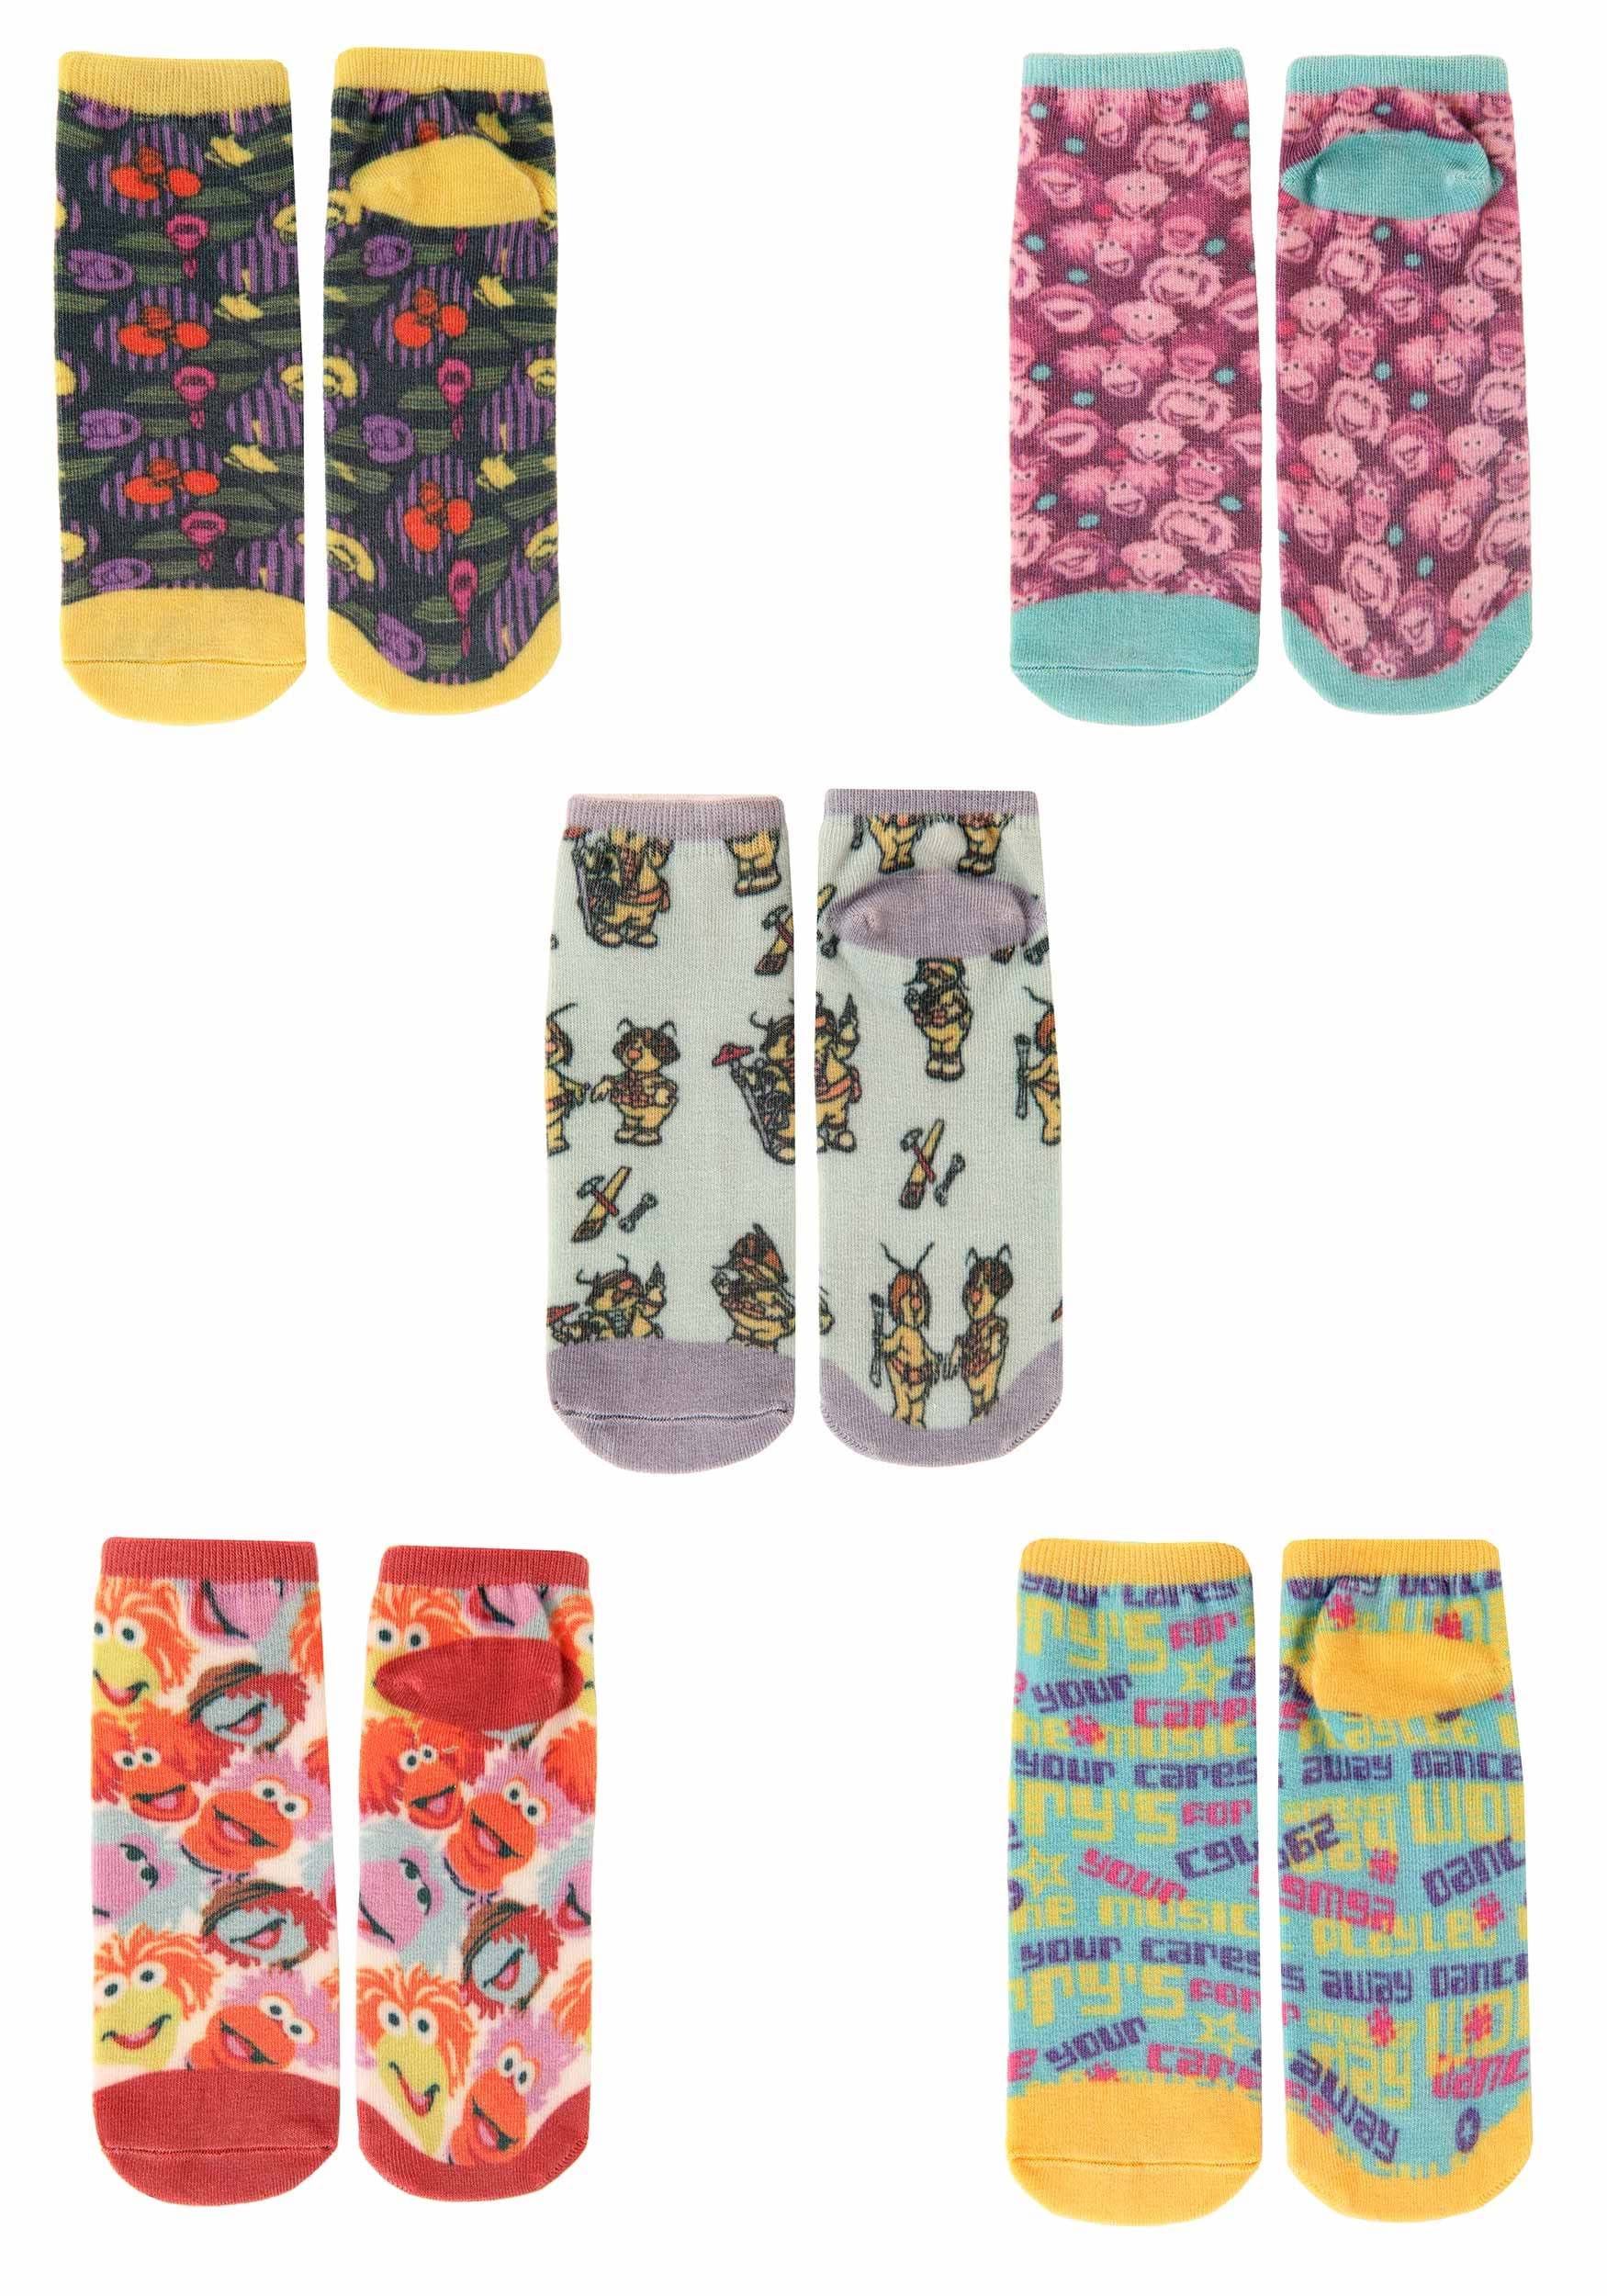 Fraggle Rock 5 Pack Socks for Adults